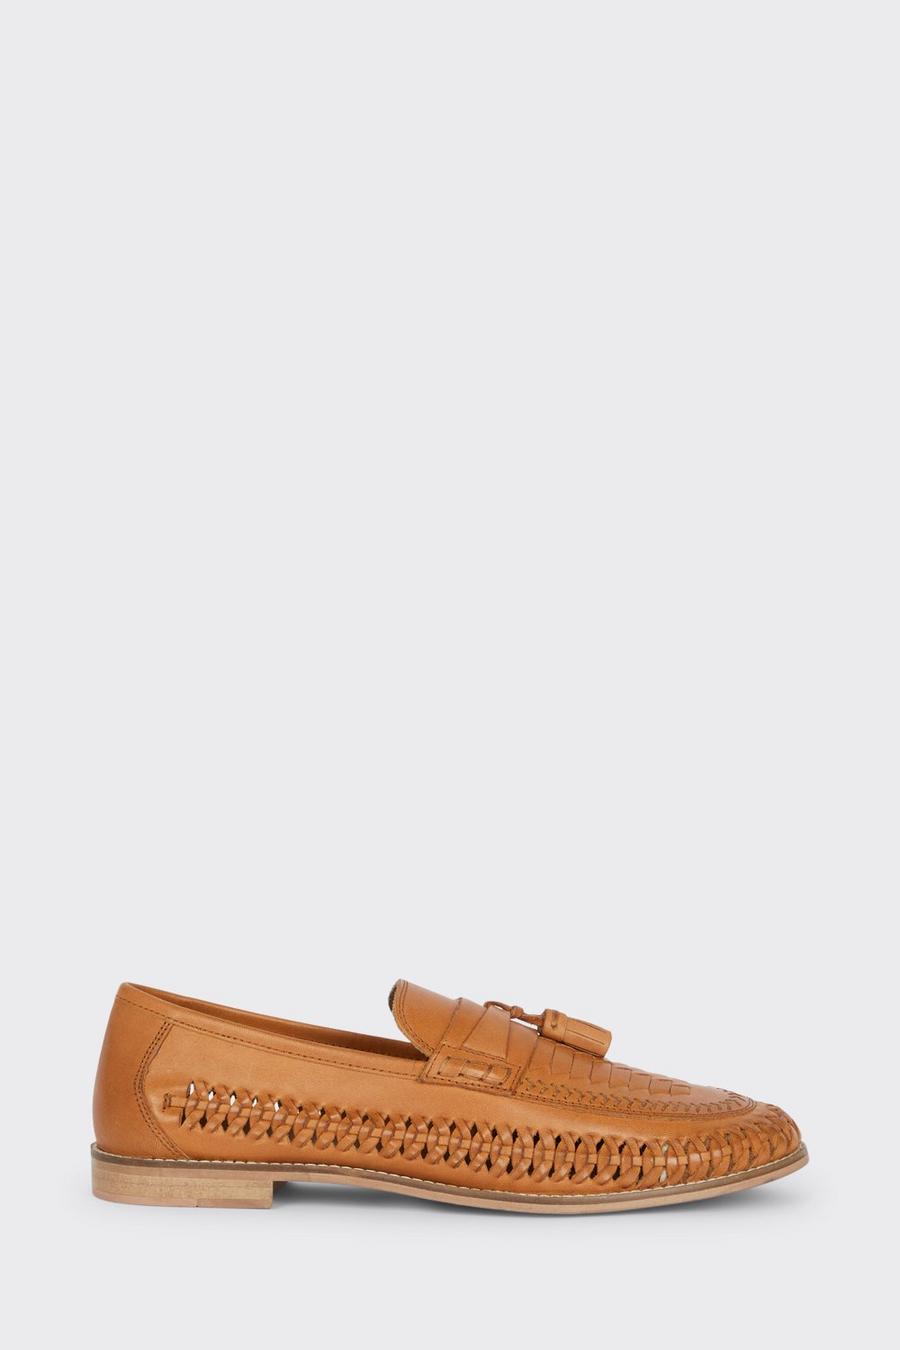 Tan Leather Woven Tassel Loafer